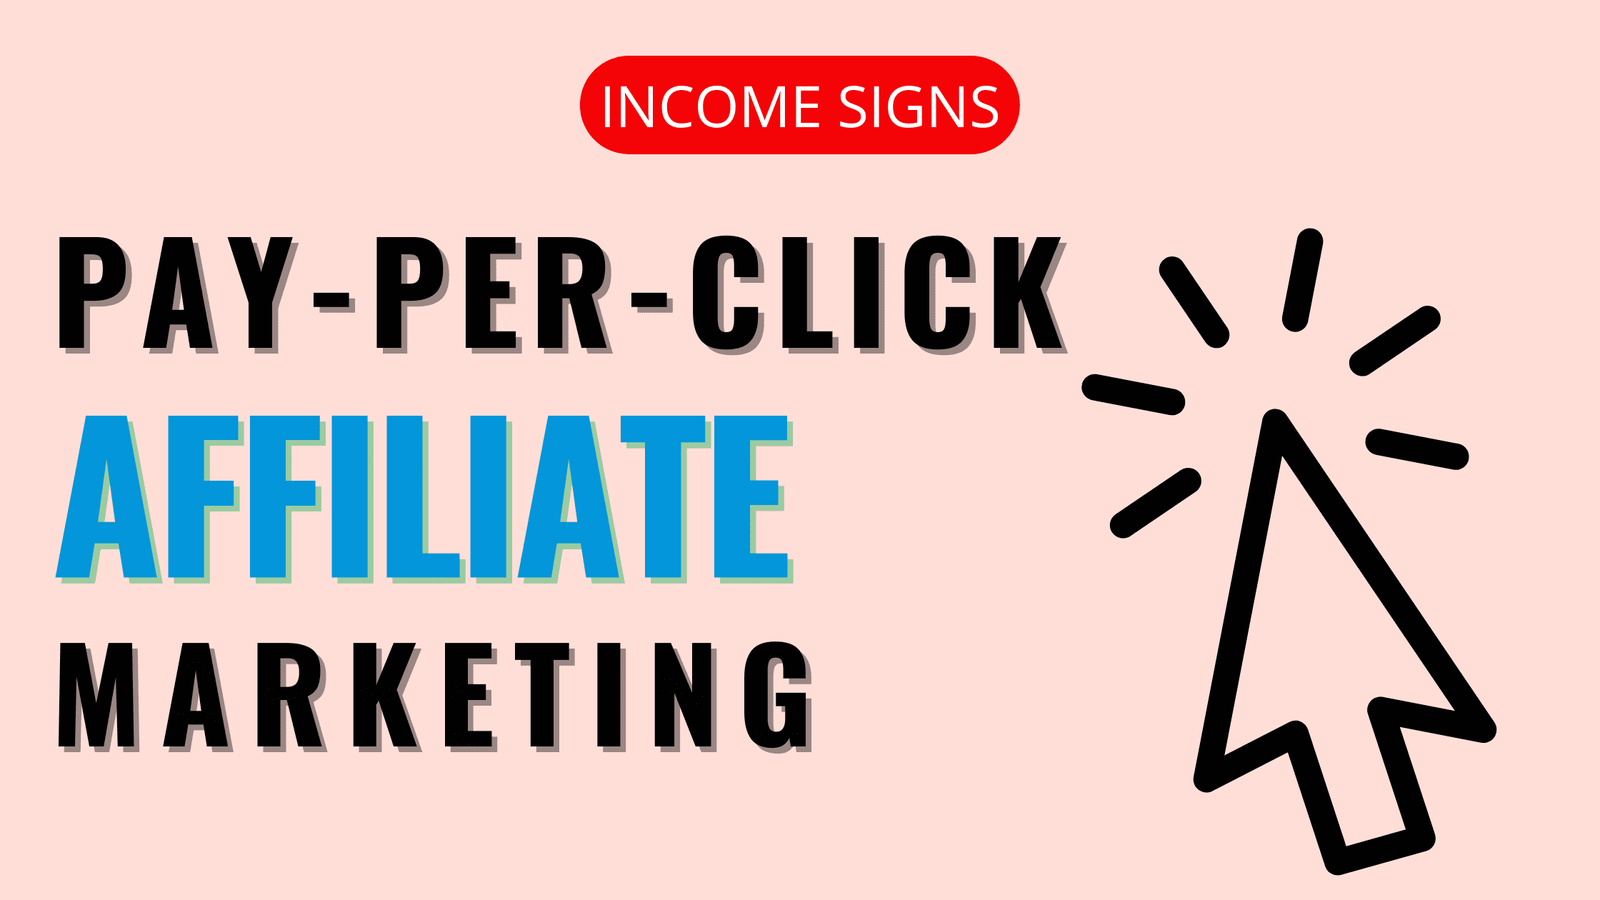 Pay-per-click Affiliate Marketing Explained!